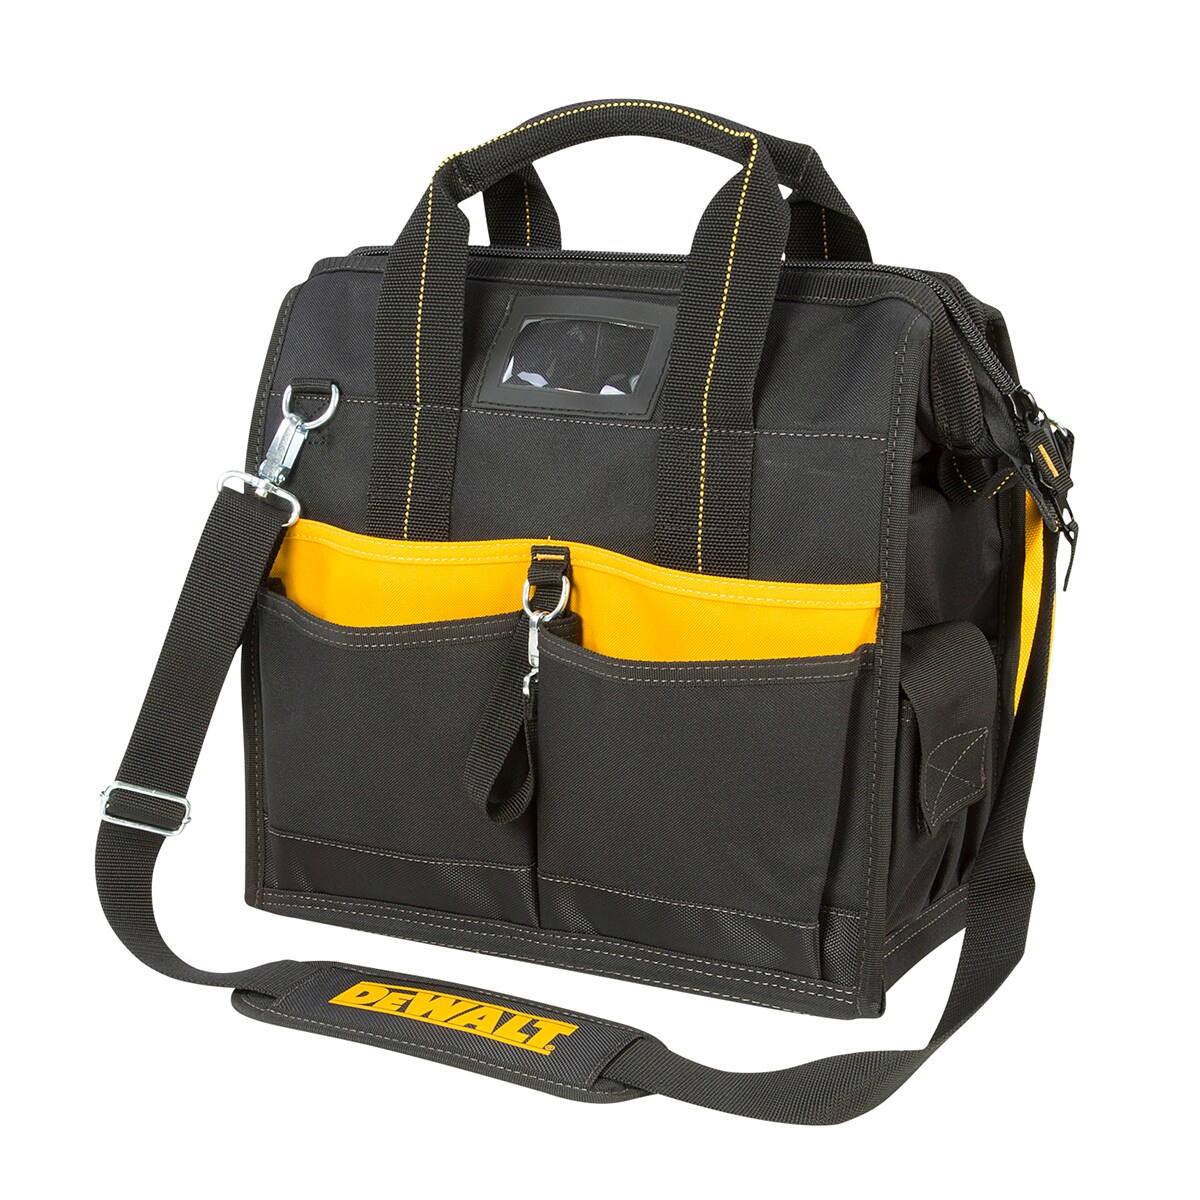 DEWALT Black/Yellow Polyester 7-in Zippered Tool Bag at Lowes.com